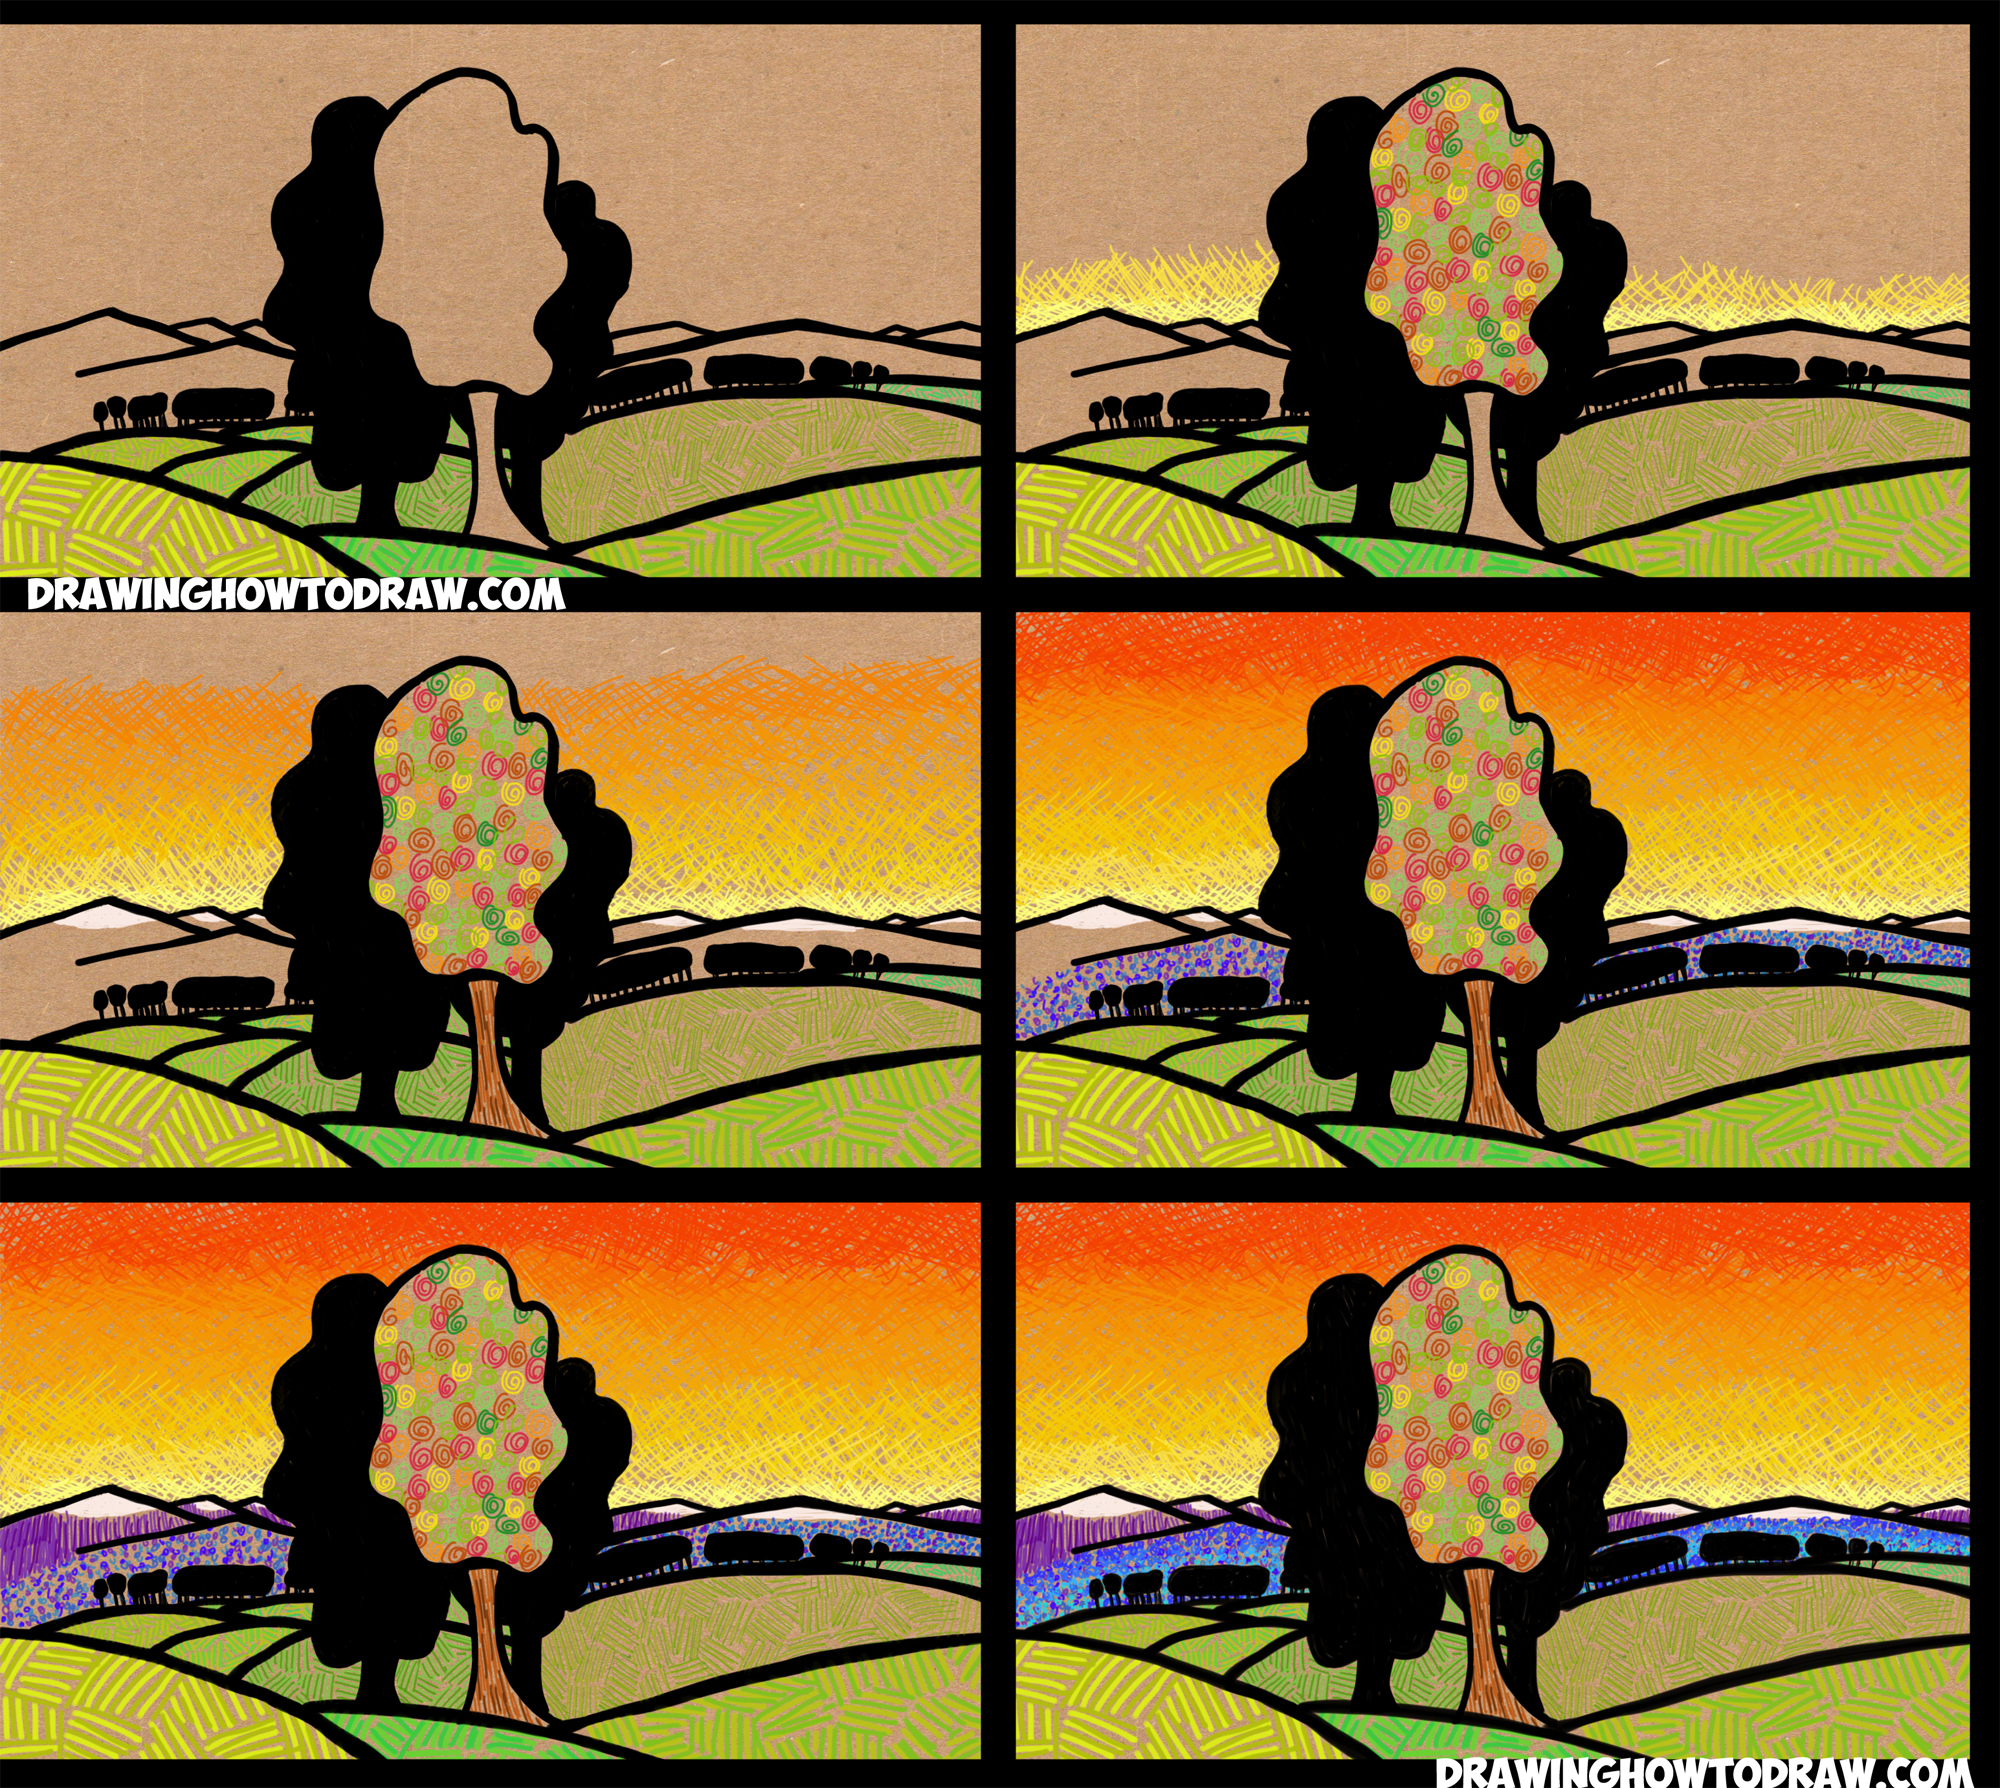 Learn How to Draw Landscapes (Sunset, Mountains, Hills, Trees) for Kids Simple Steps Drawing Lesson Using Patterns to Add Texture (Great Art Lesson for Children)